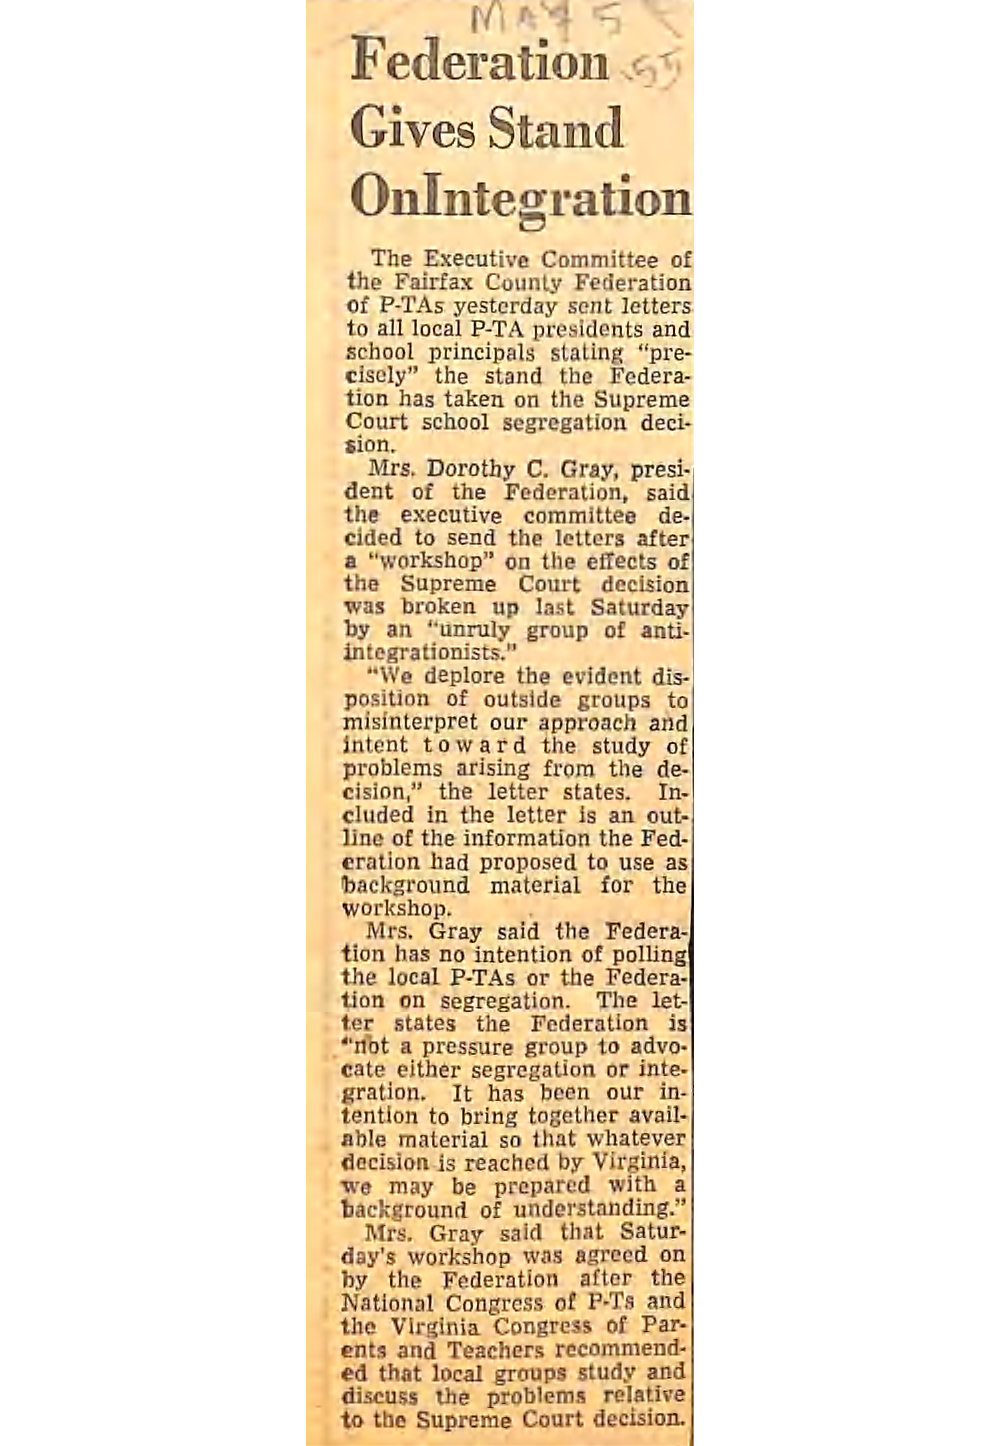 Federation Gives Stand
On lntegration. May 5, 1955. Source: Center for Local History, Arlington Public Library.